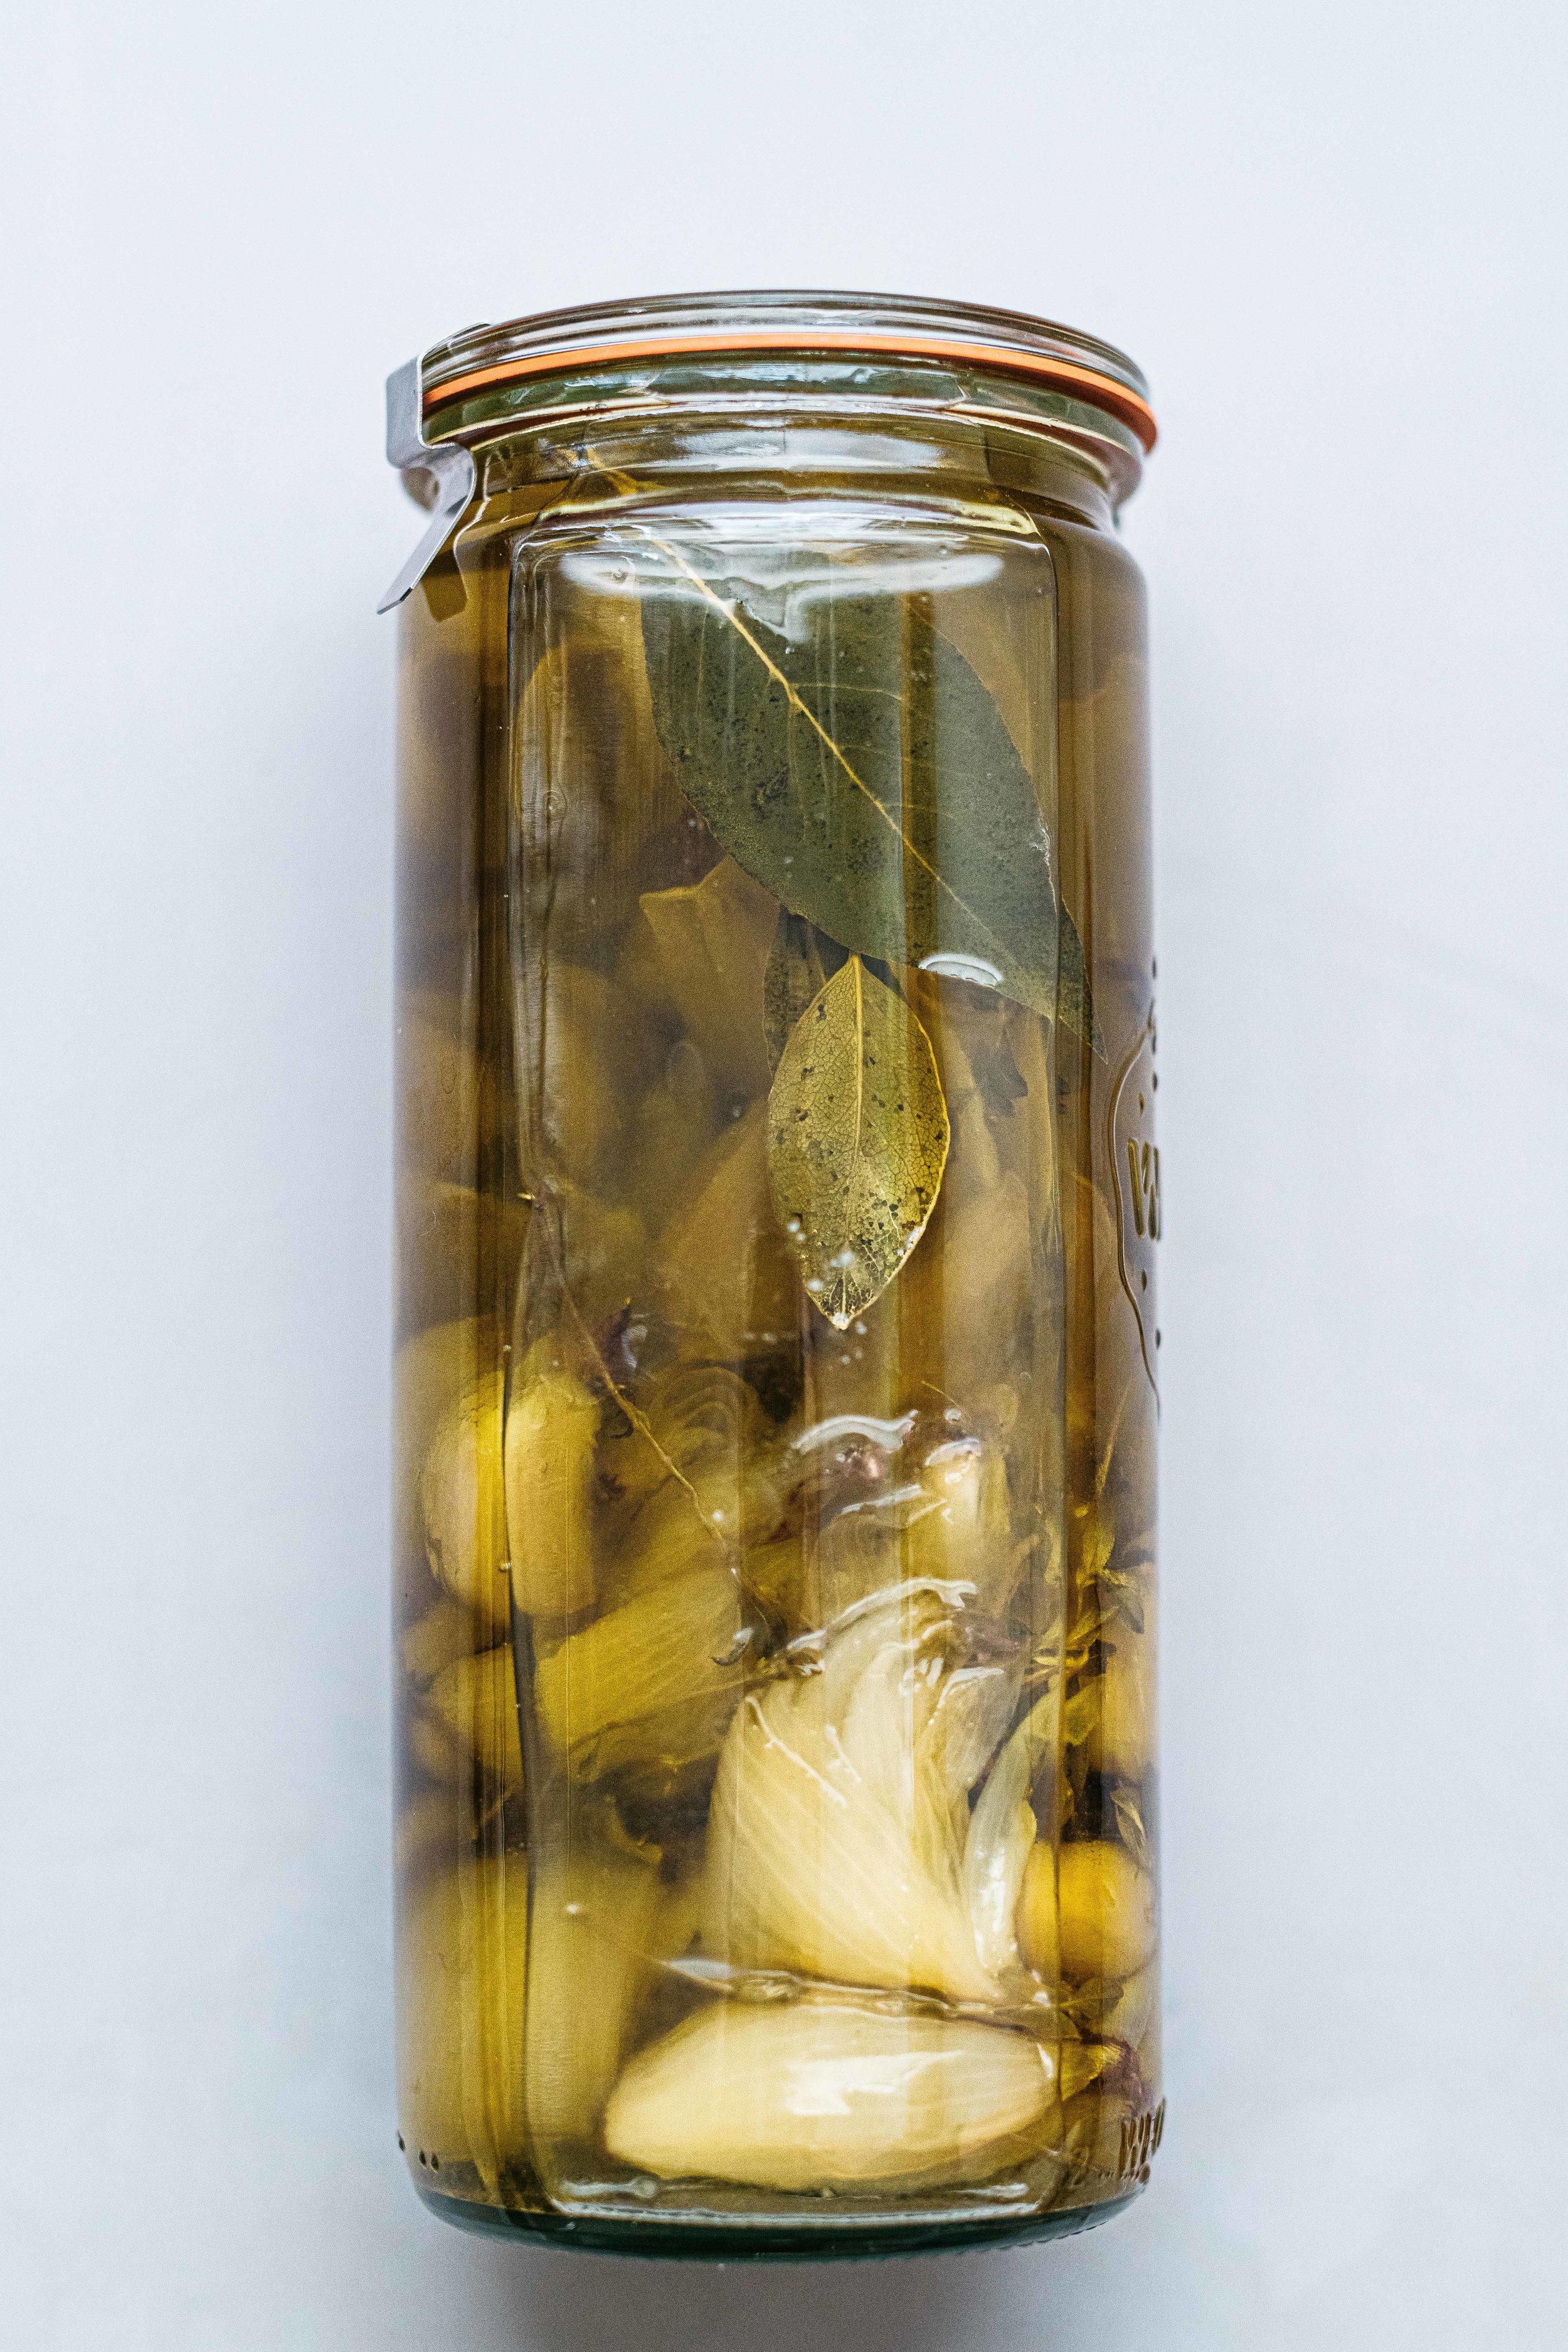 Shallot Confit with Herbs